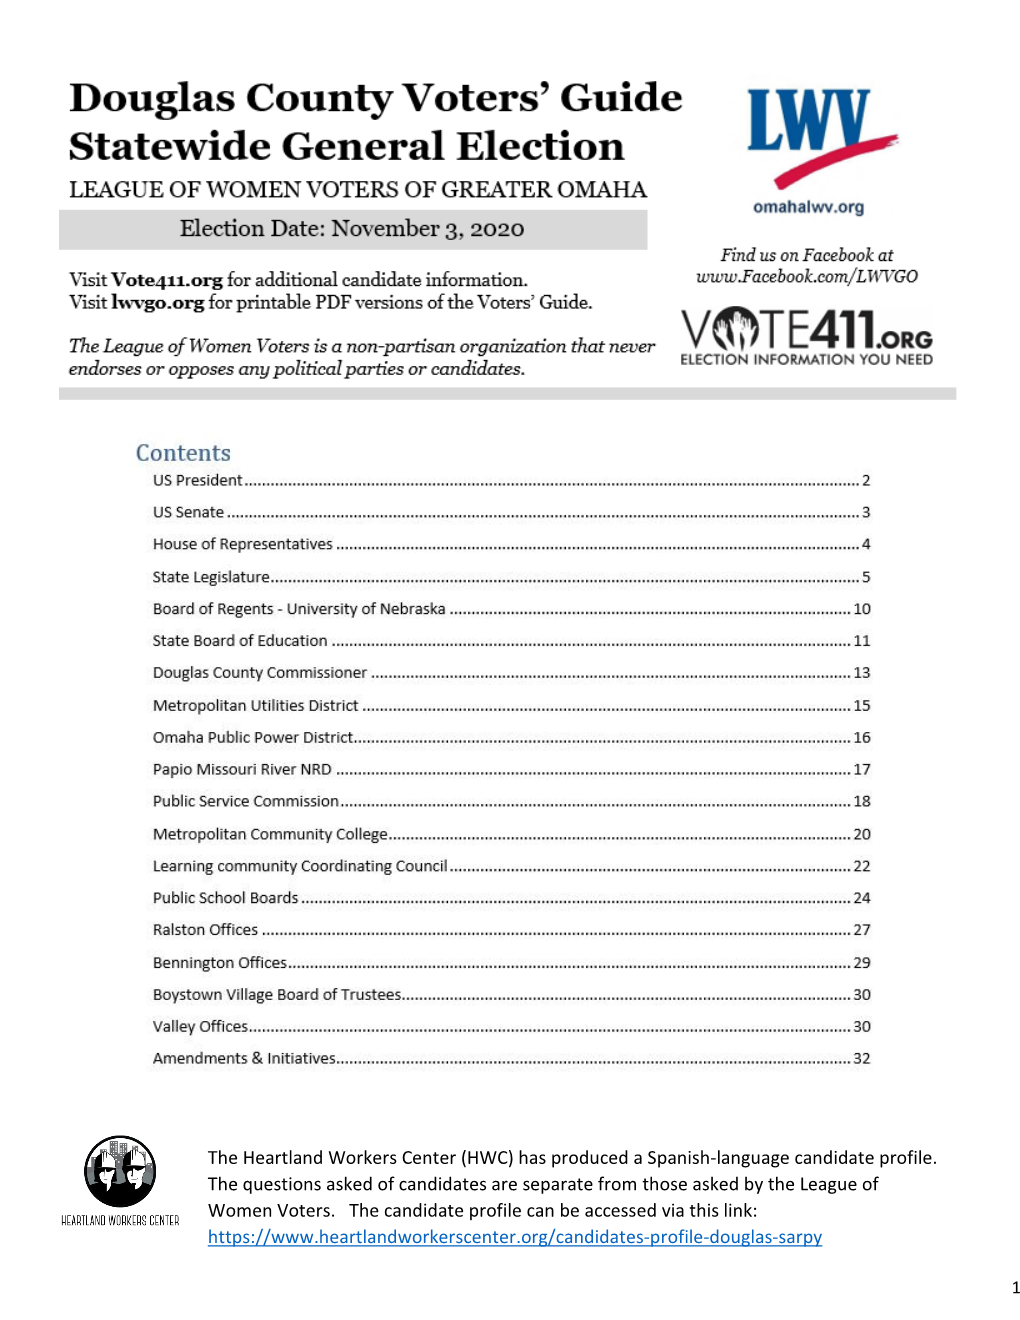 LWVGO 2020 Voters Guide for General Election